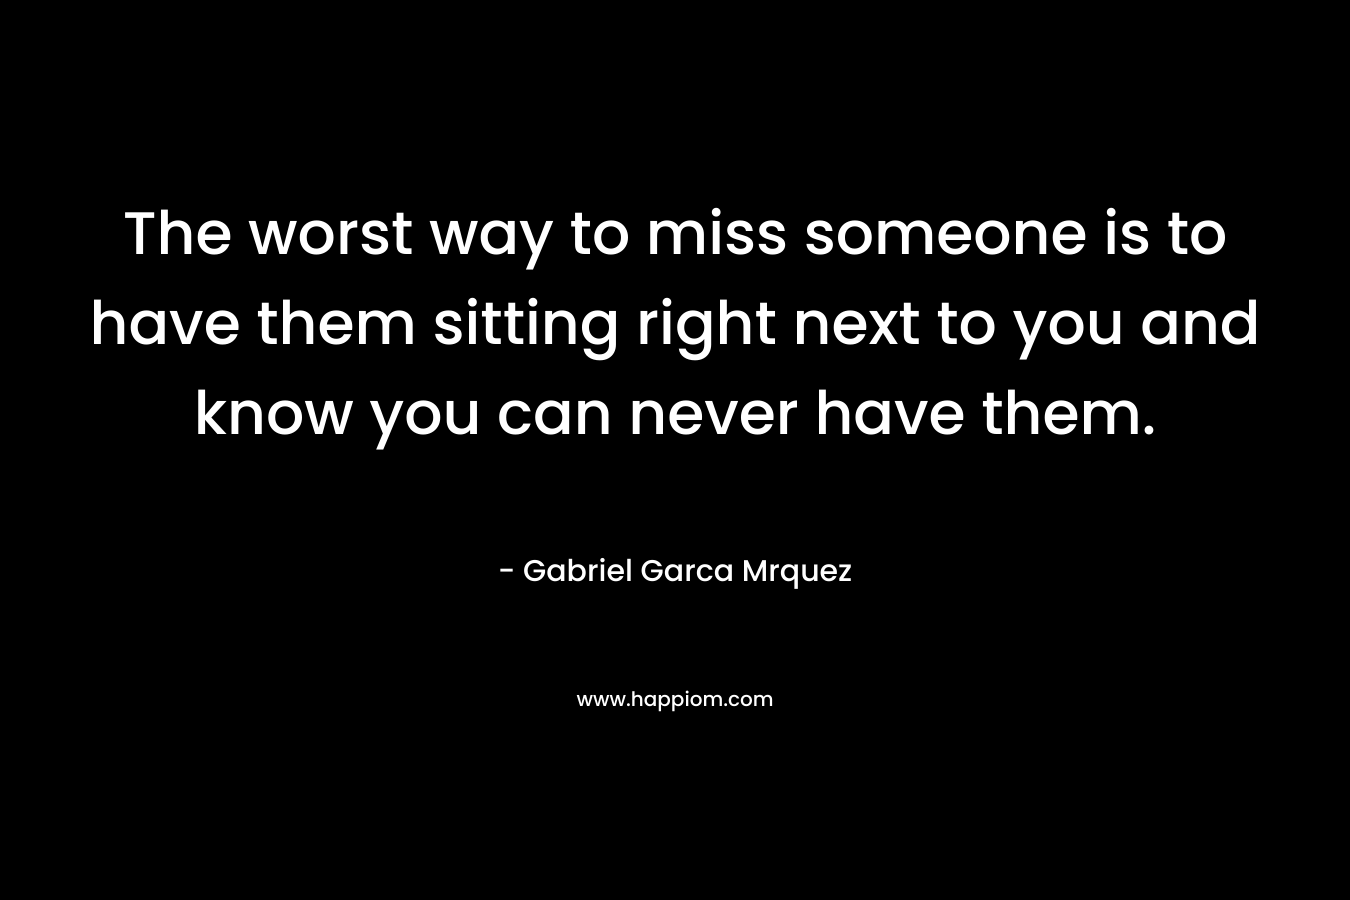 The worst way to miss someone is to have them sitting right next to you and know you can never have them.